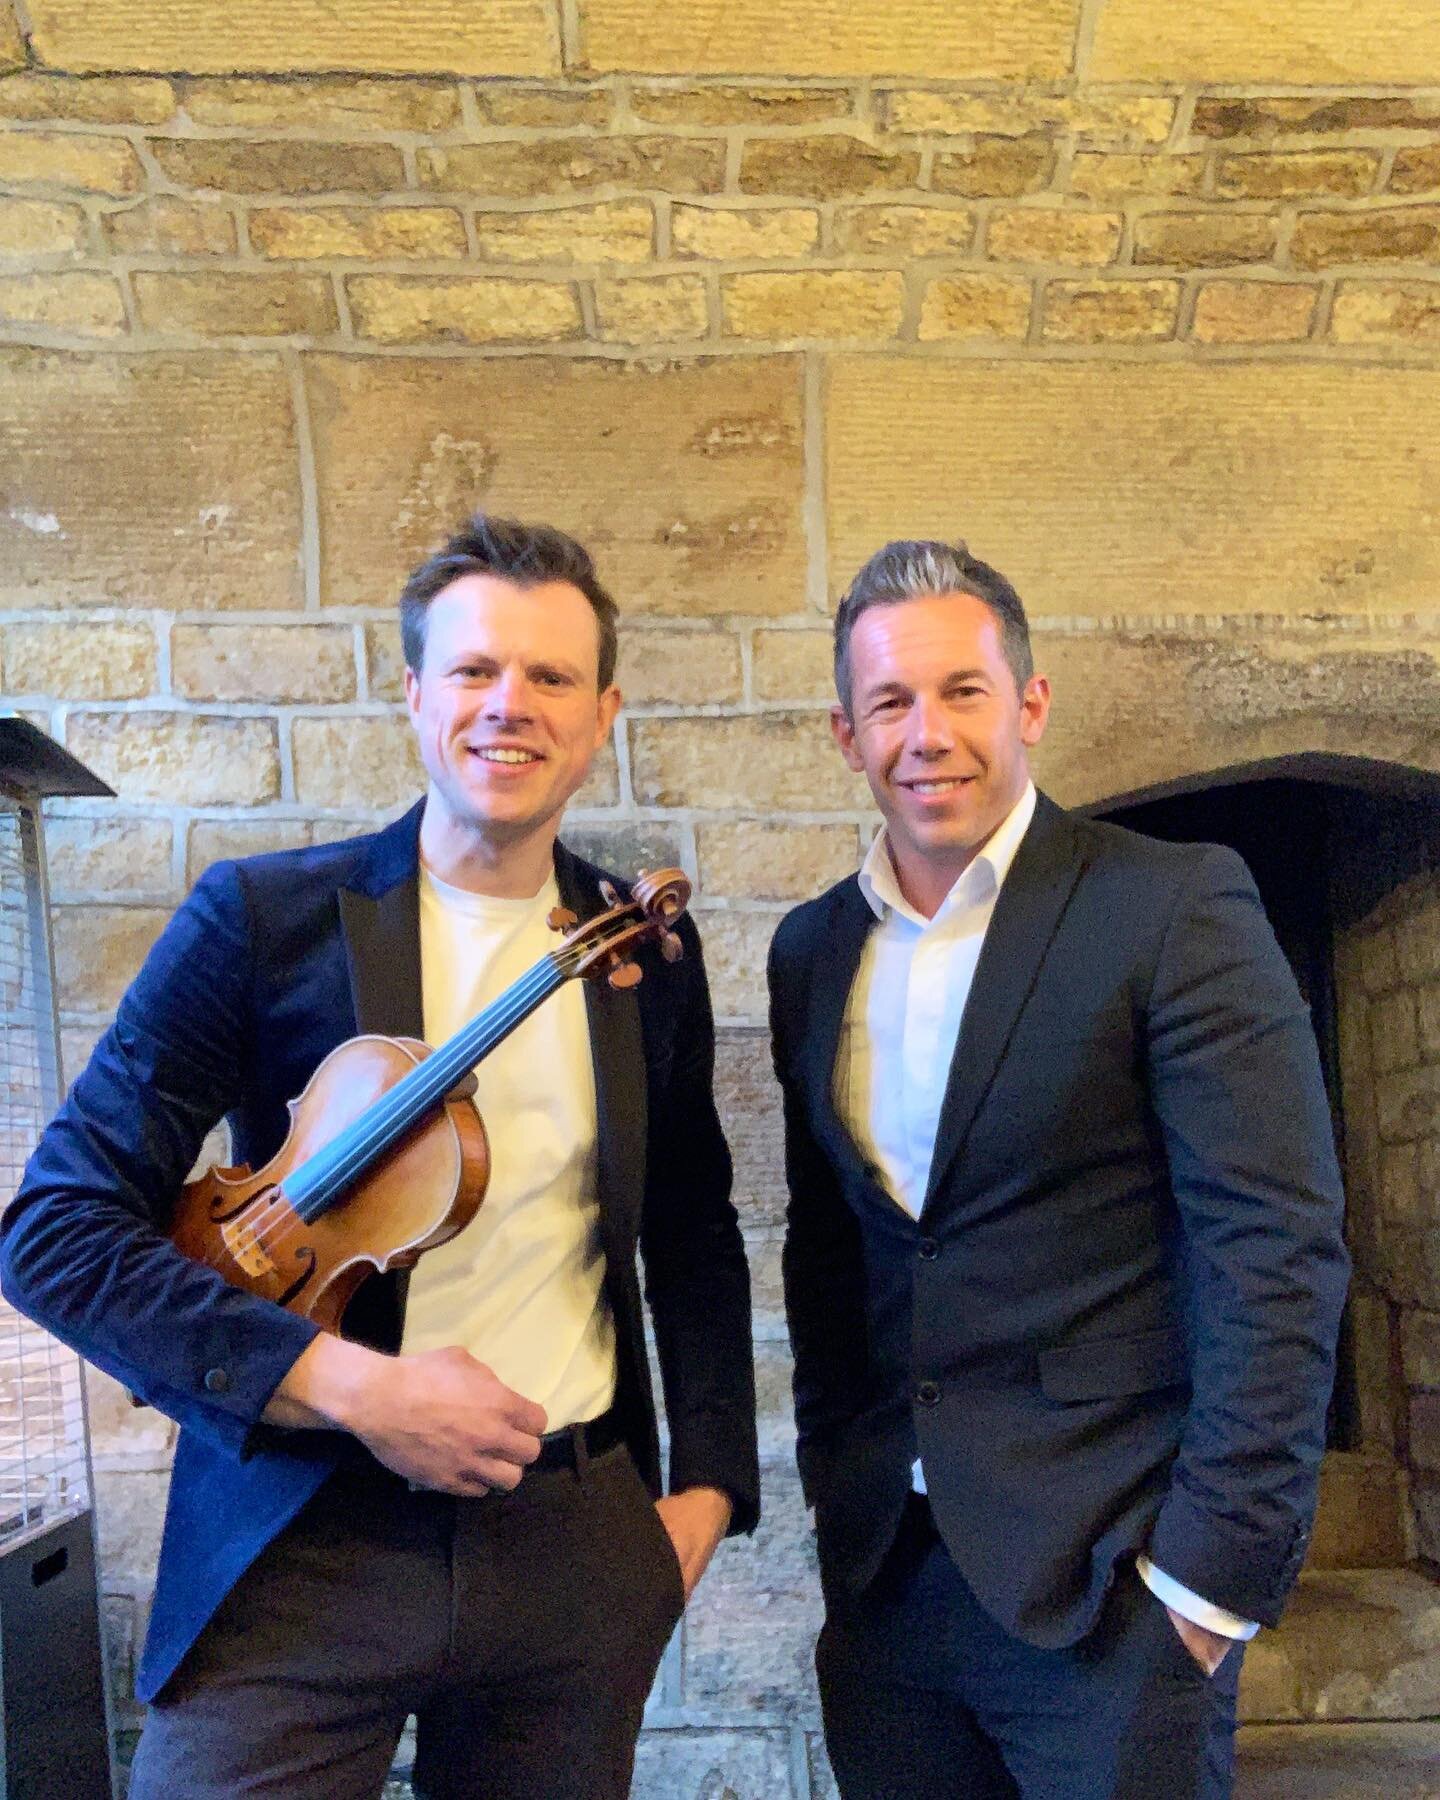 Braving the cold at the stunning @upperhouseestate. Ready for an evening performance of Italian classics with @timabelpiano #upperhousehayfield #upperhouseestate #violin #violinist #privateevent #event #events #musician #musicianlife